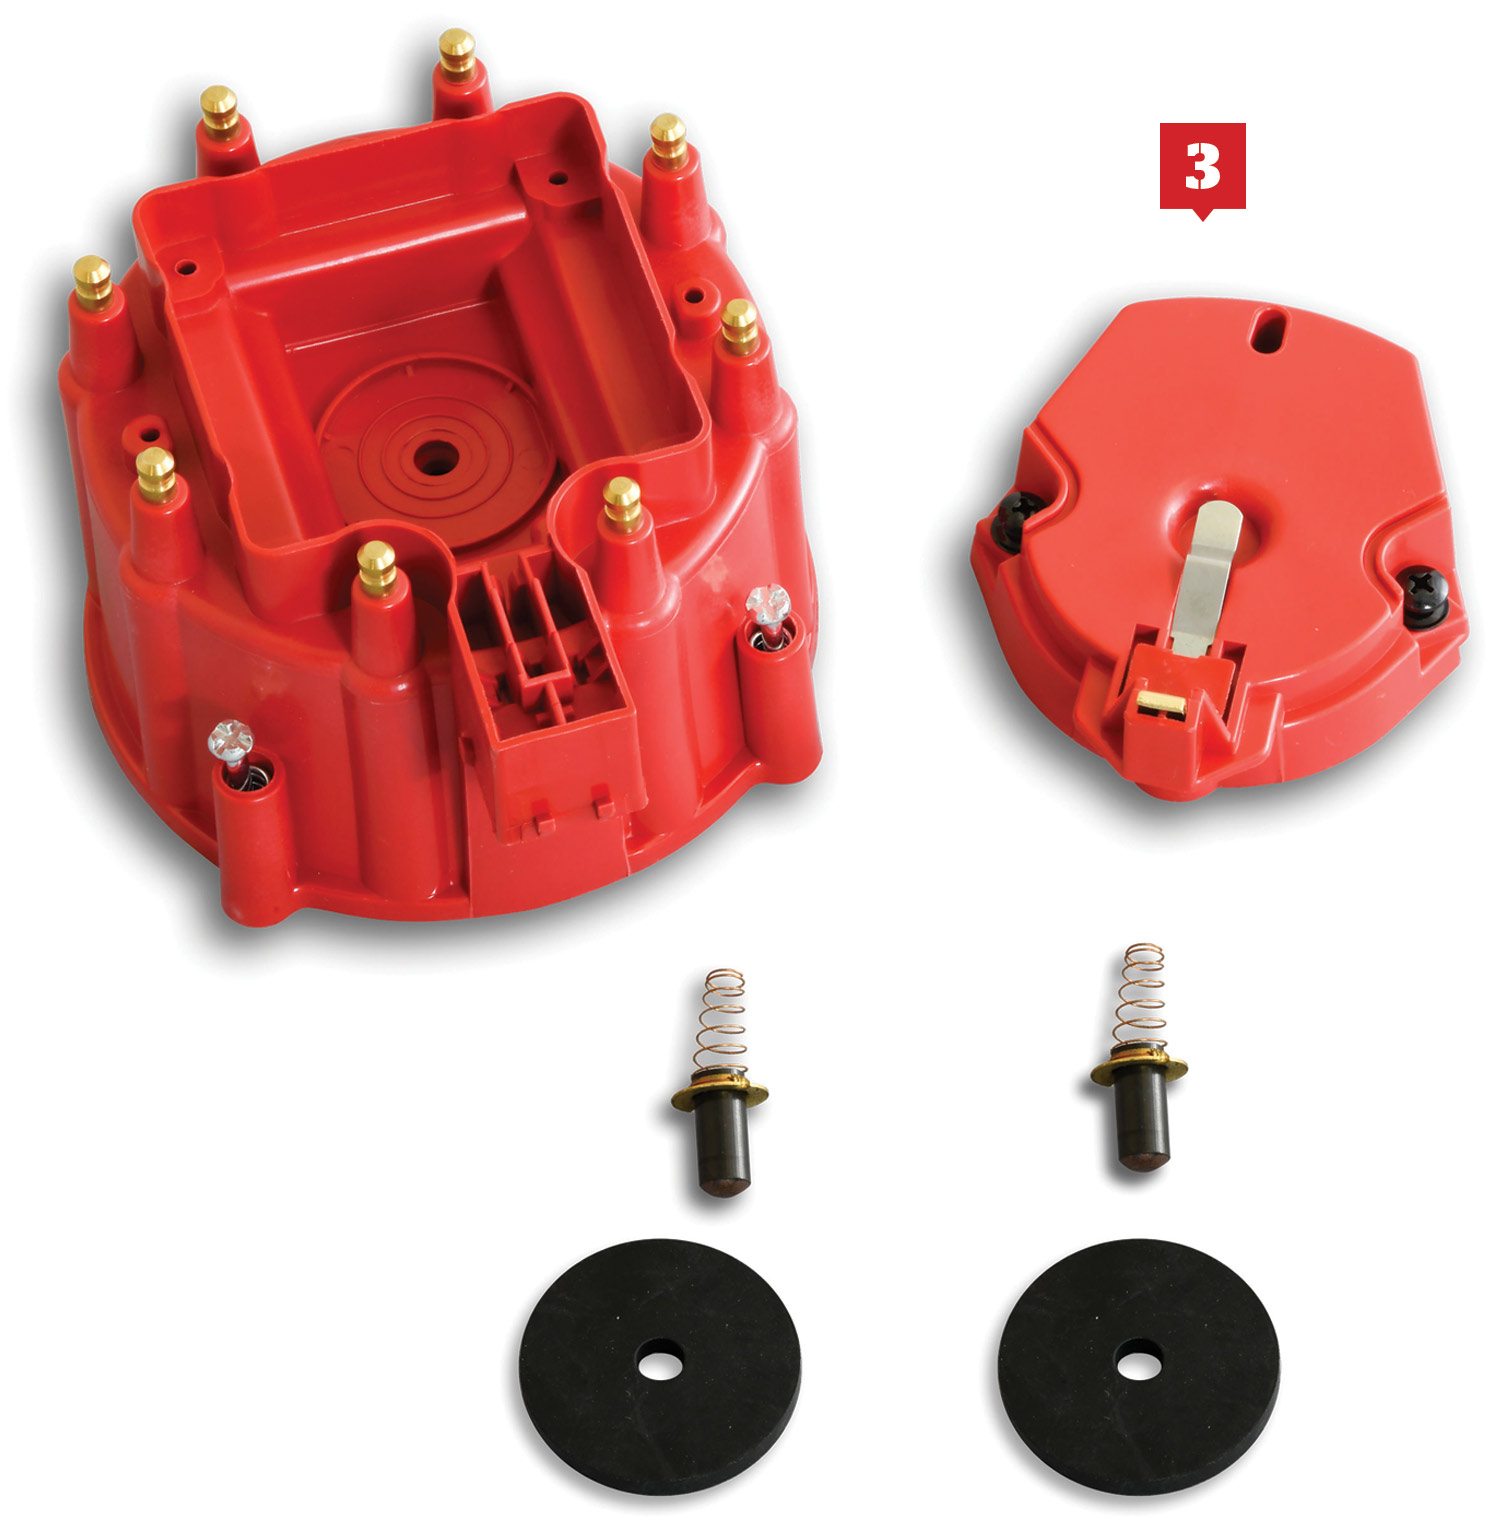 PerTronix’s HEI cap and rotor kit pieces